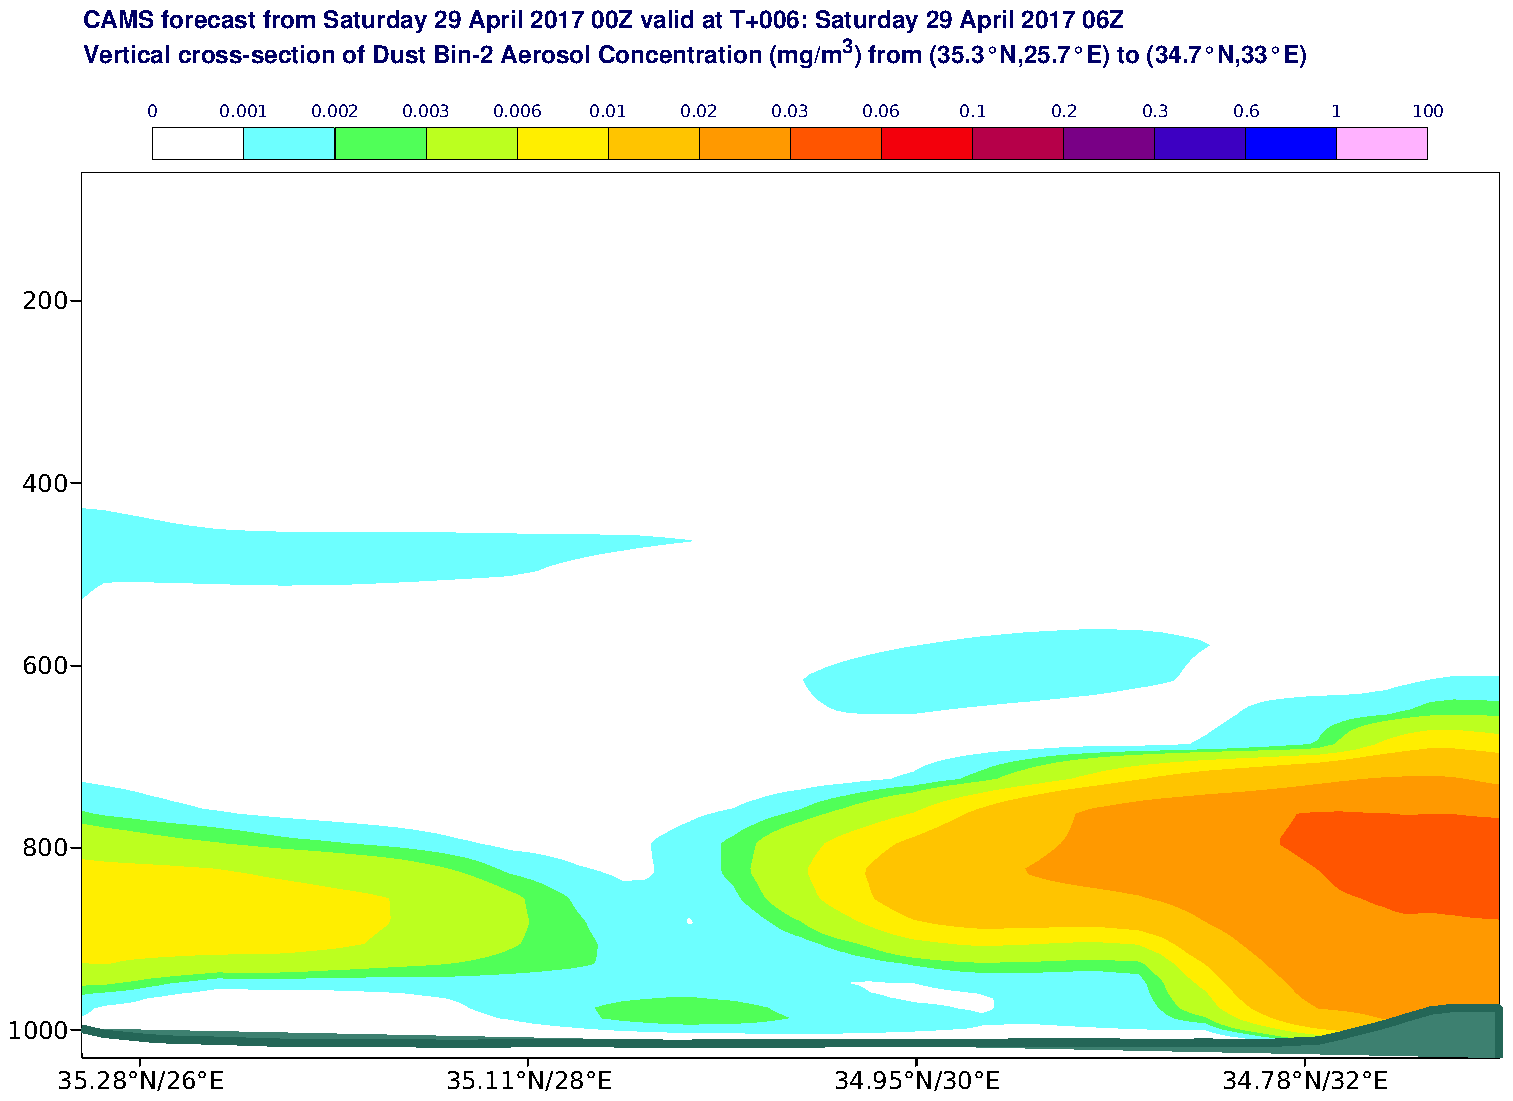 Vertical cross-section of Dust Bin-2 Aerosol Concentration (mg/m3) valid at T6 - 2017-04-29 06:00